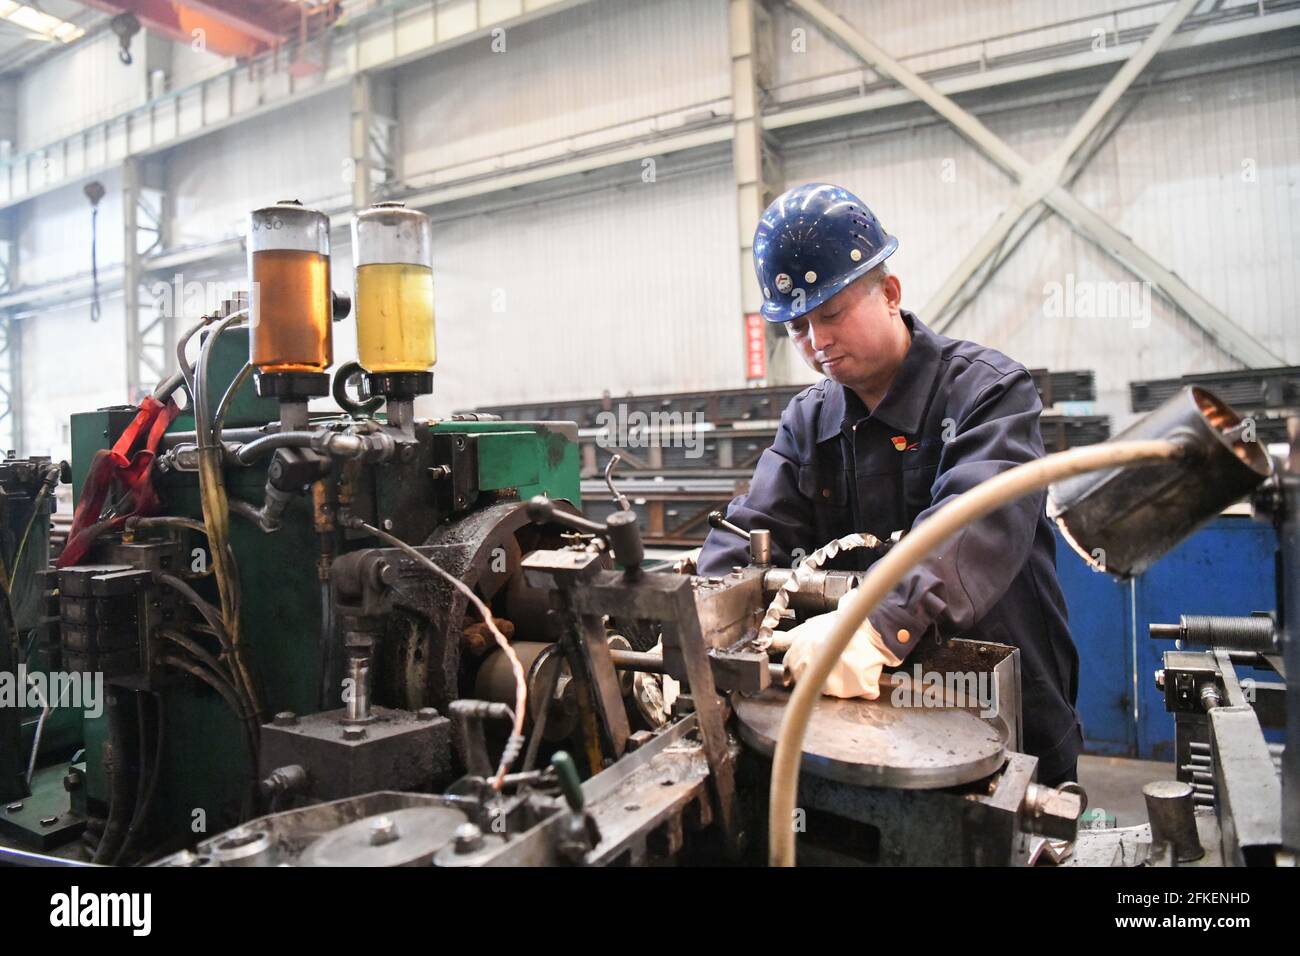 (210501) -- BEIJING, May 1, 2021 (Xinhua) -- Gao Lihua works at a workshop of Harbin Air Conditioning Co., Ltd. in Harbin, northeast China's Heilongjiang Province, April 29, 2021. Carrying the title of National Model Worker, Gao has been working at the company for 36 years since 1985 and is skilled to manufacture key parts of air handling units of nuclear power plant.  China marks International Labor Day on May 1 each year.International Workers' Day, also known as May Day, is observed on May 1 in China. Portraits of model workers from Liaoning, Heilongjiang and Jilin, were pictured by photogra Stock Photo